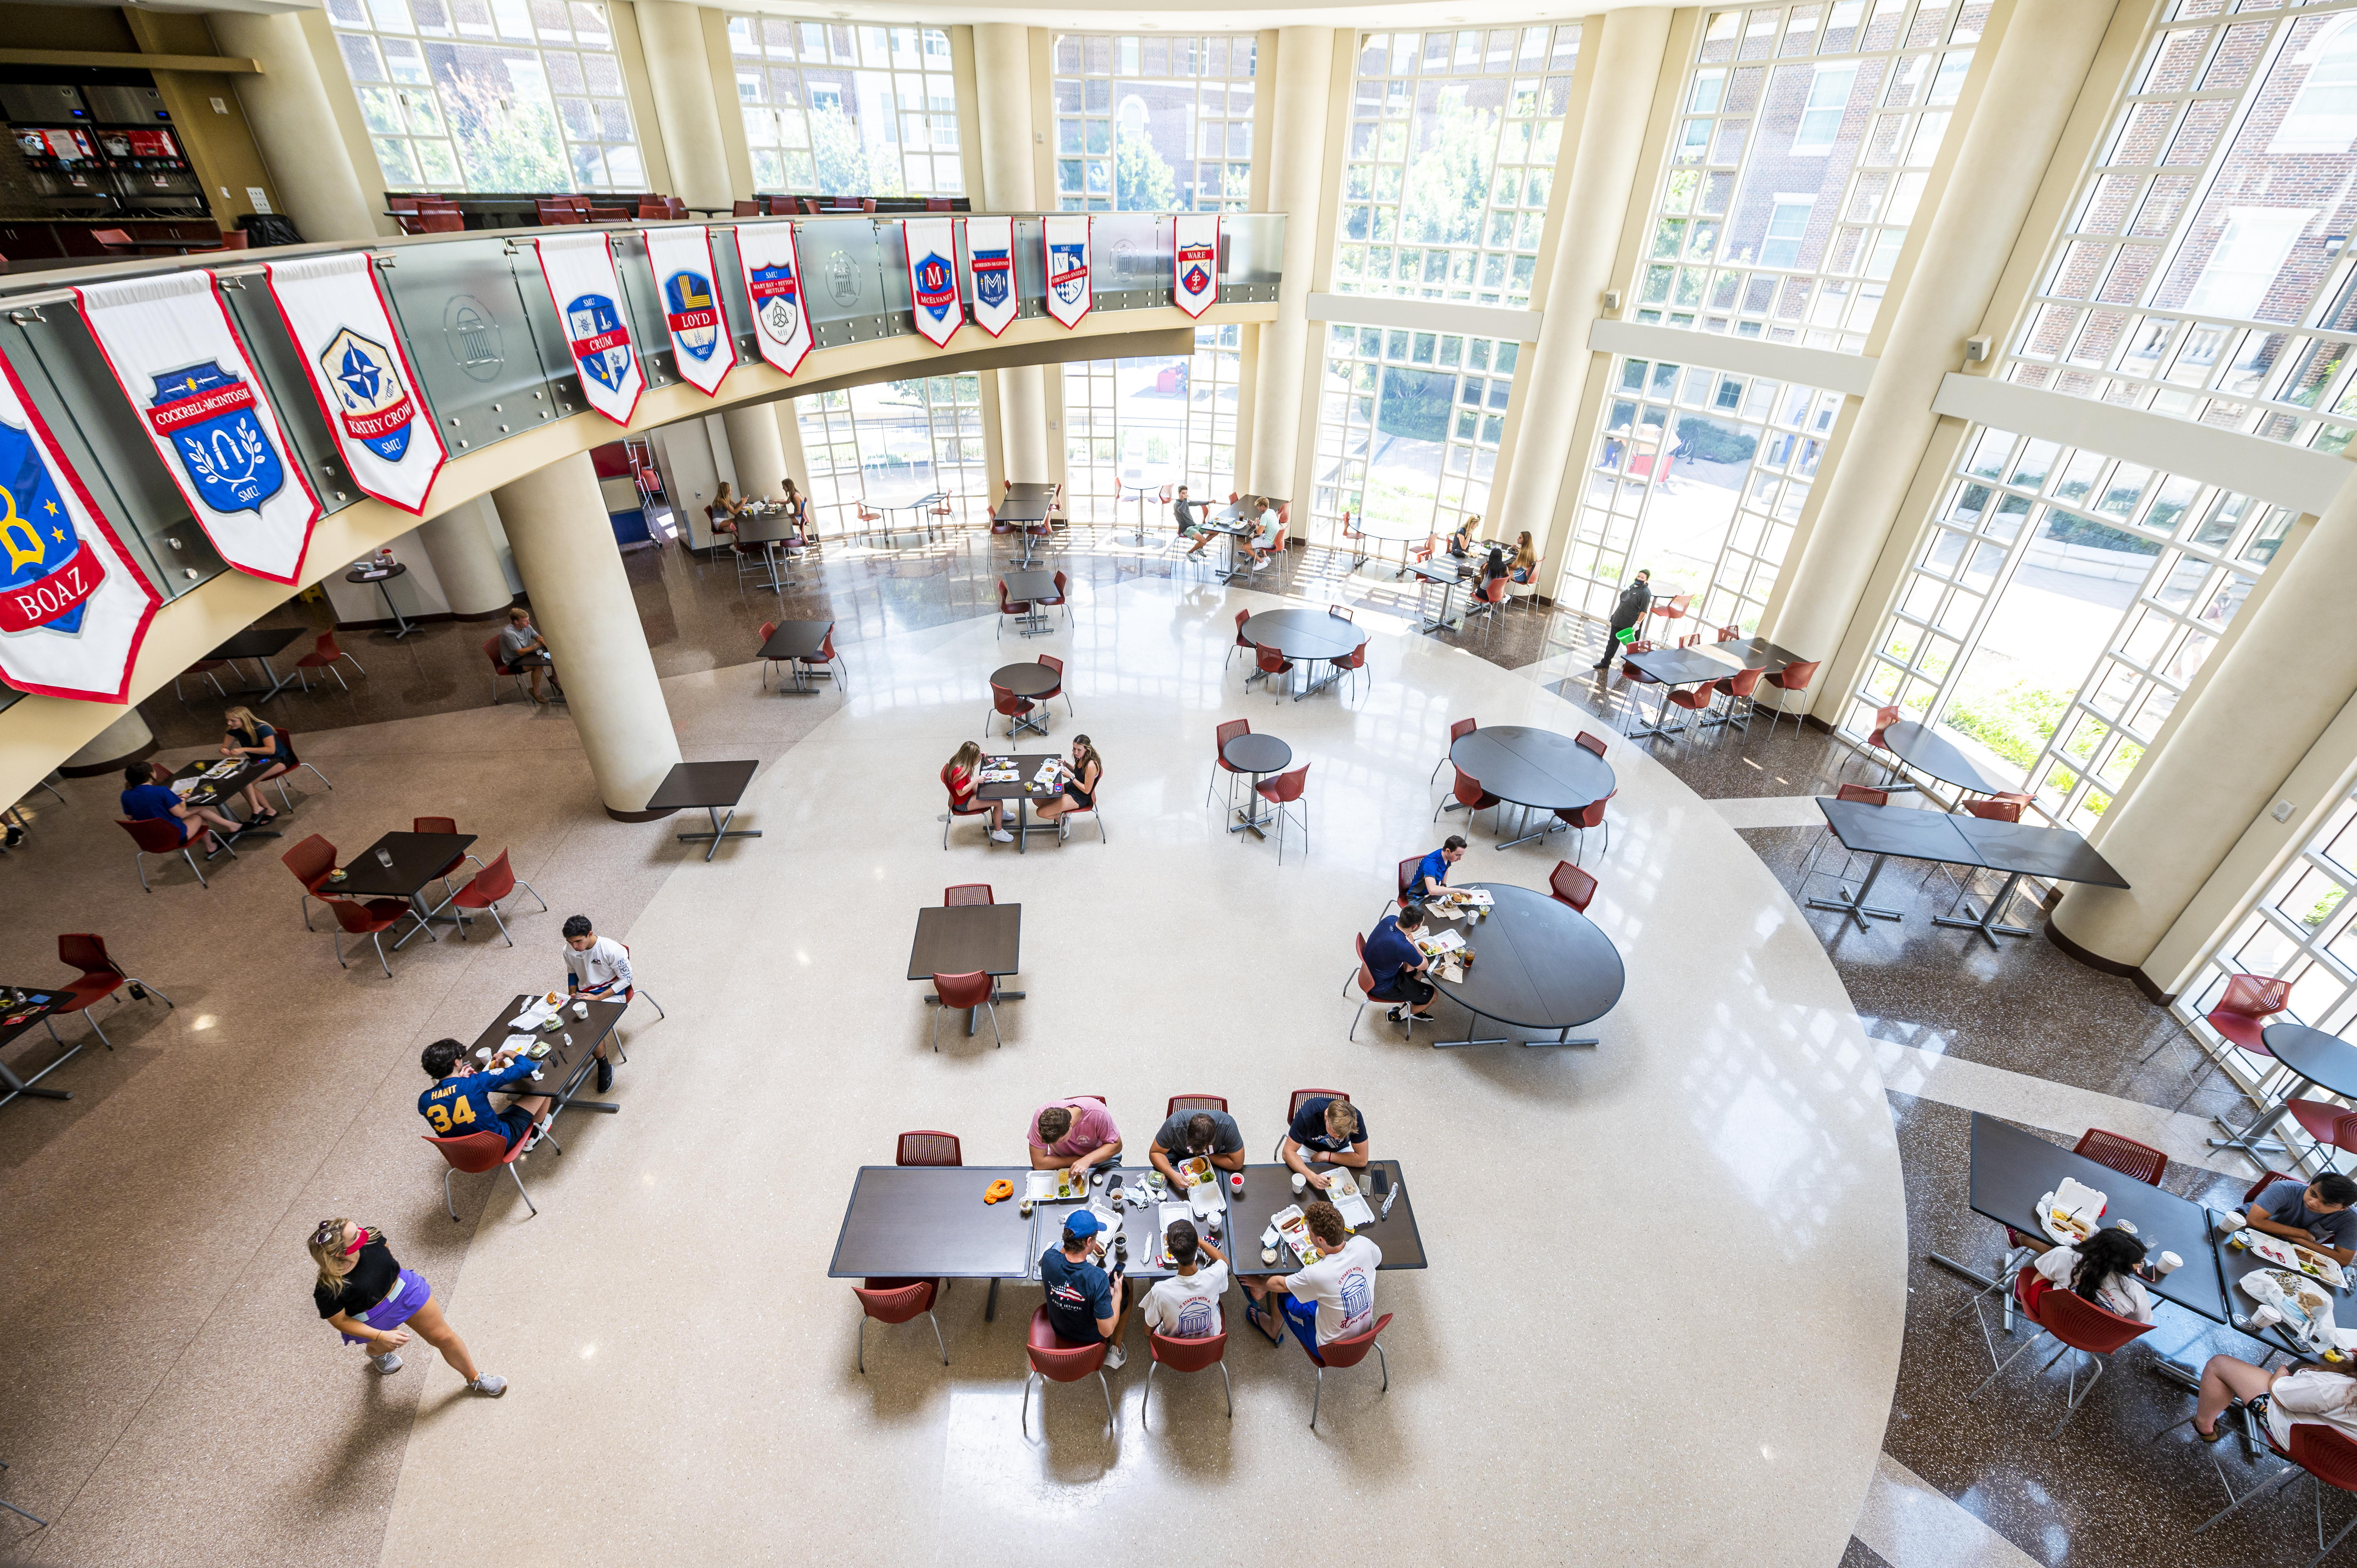 Birds eye view of students eating in dinning hall